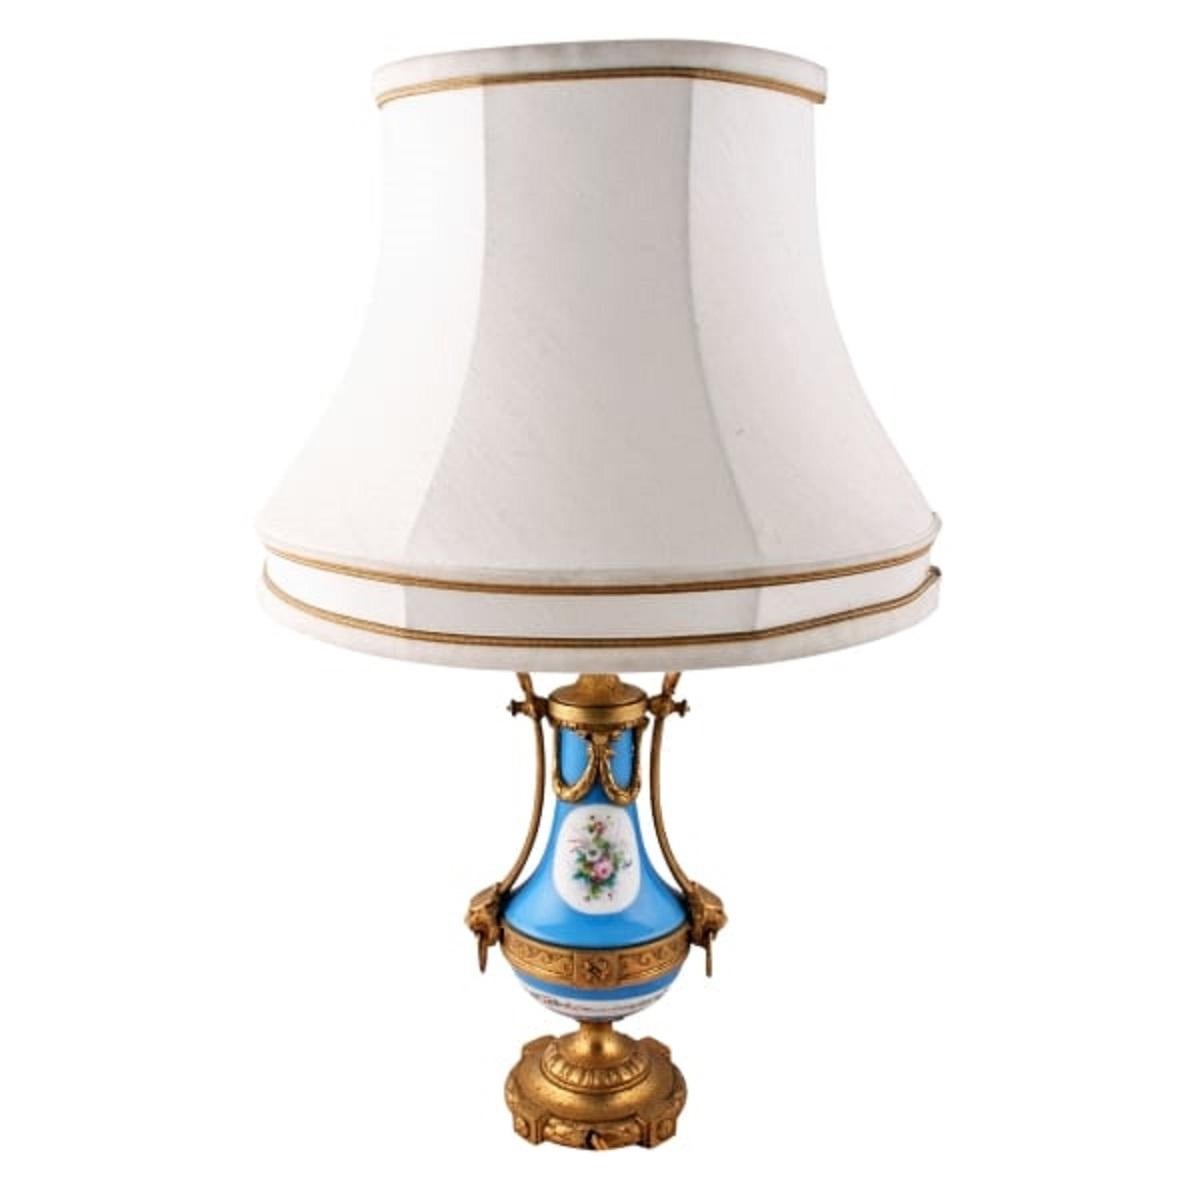 An late 19th century Sévres porcelain and ormolu table lamp.

The urn shaped Sévres porcelain has a blue background with decorative panels of birds and flowers.

The vase is held in an ormolu frame consisting of a circular wreath shield base